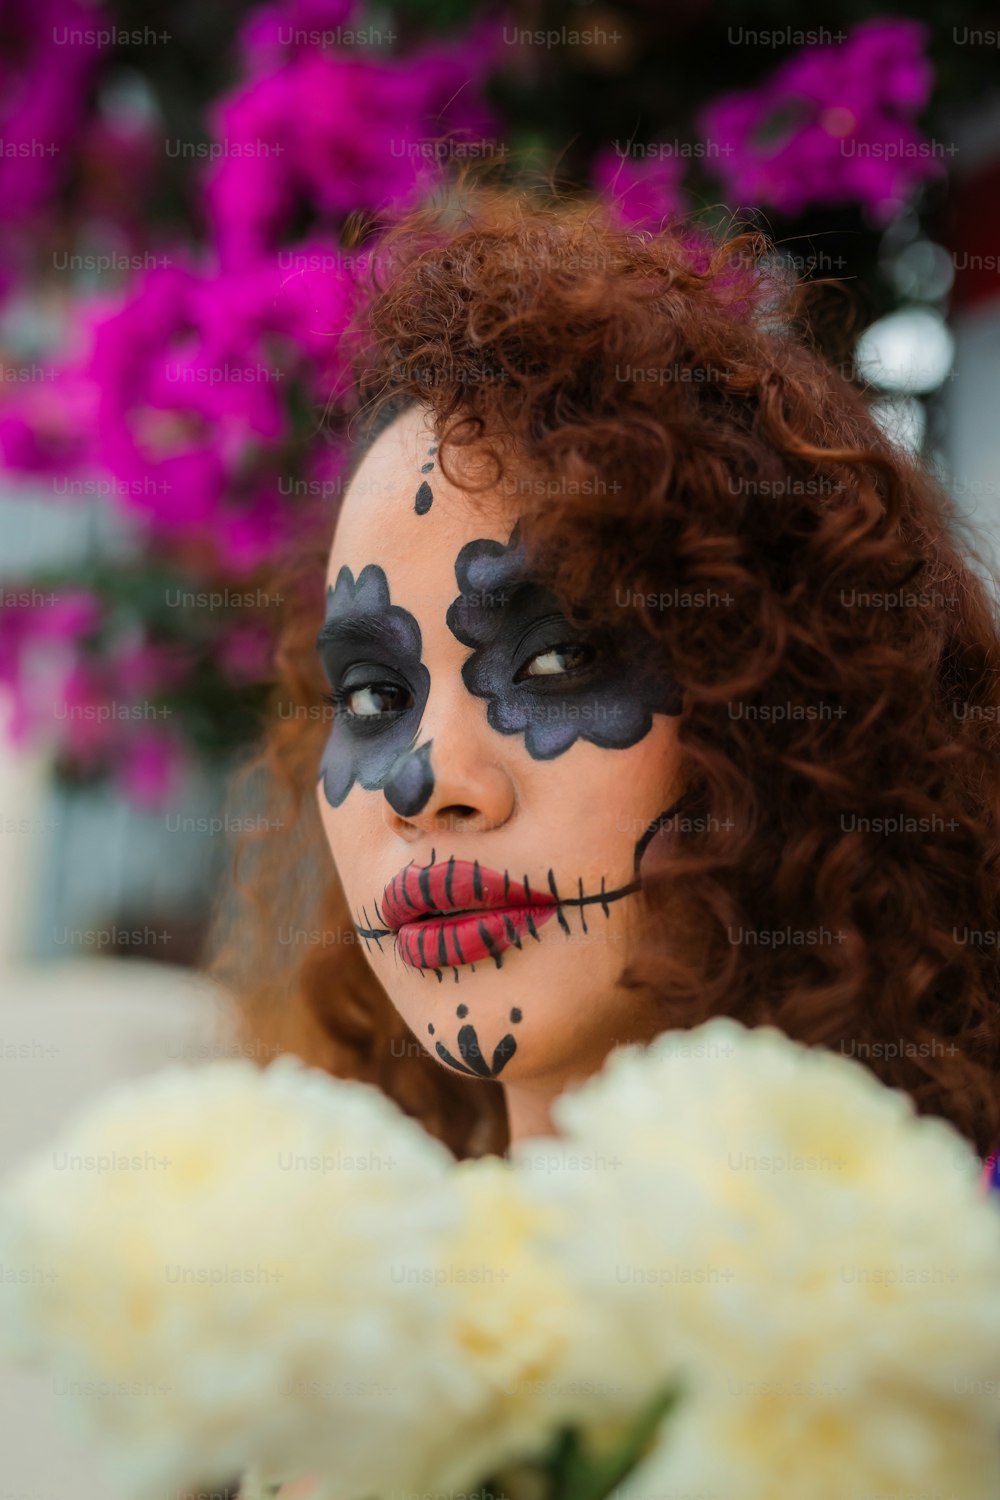 a woman with face paint holding a bouquet of flowers